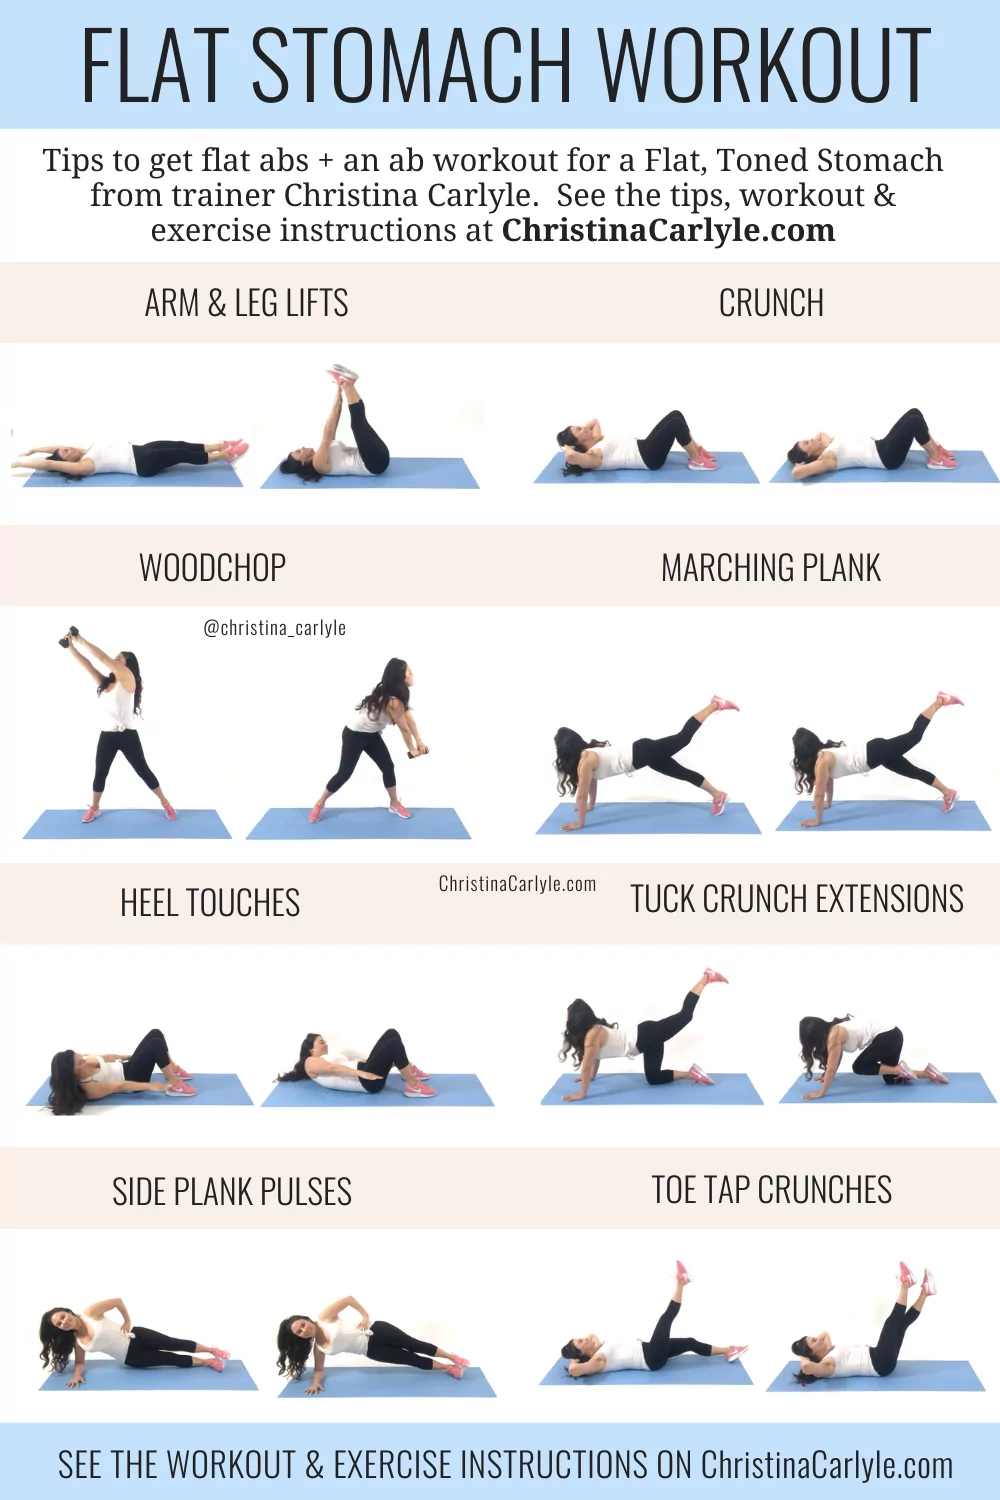 Yoga Poses For Those Sculpted Abs! - Blog - HealthifyMe